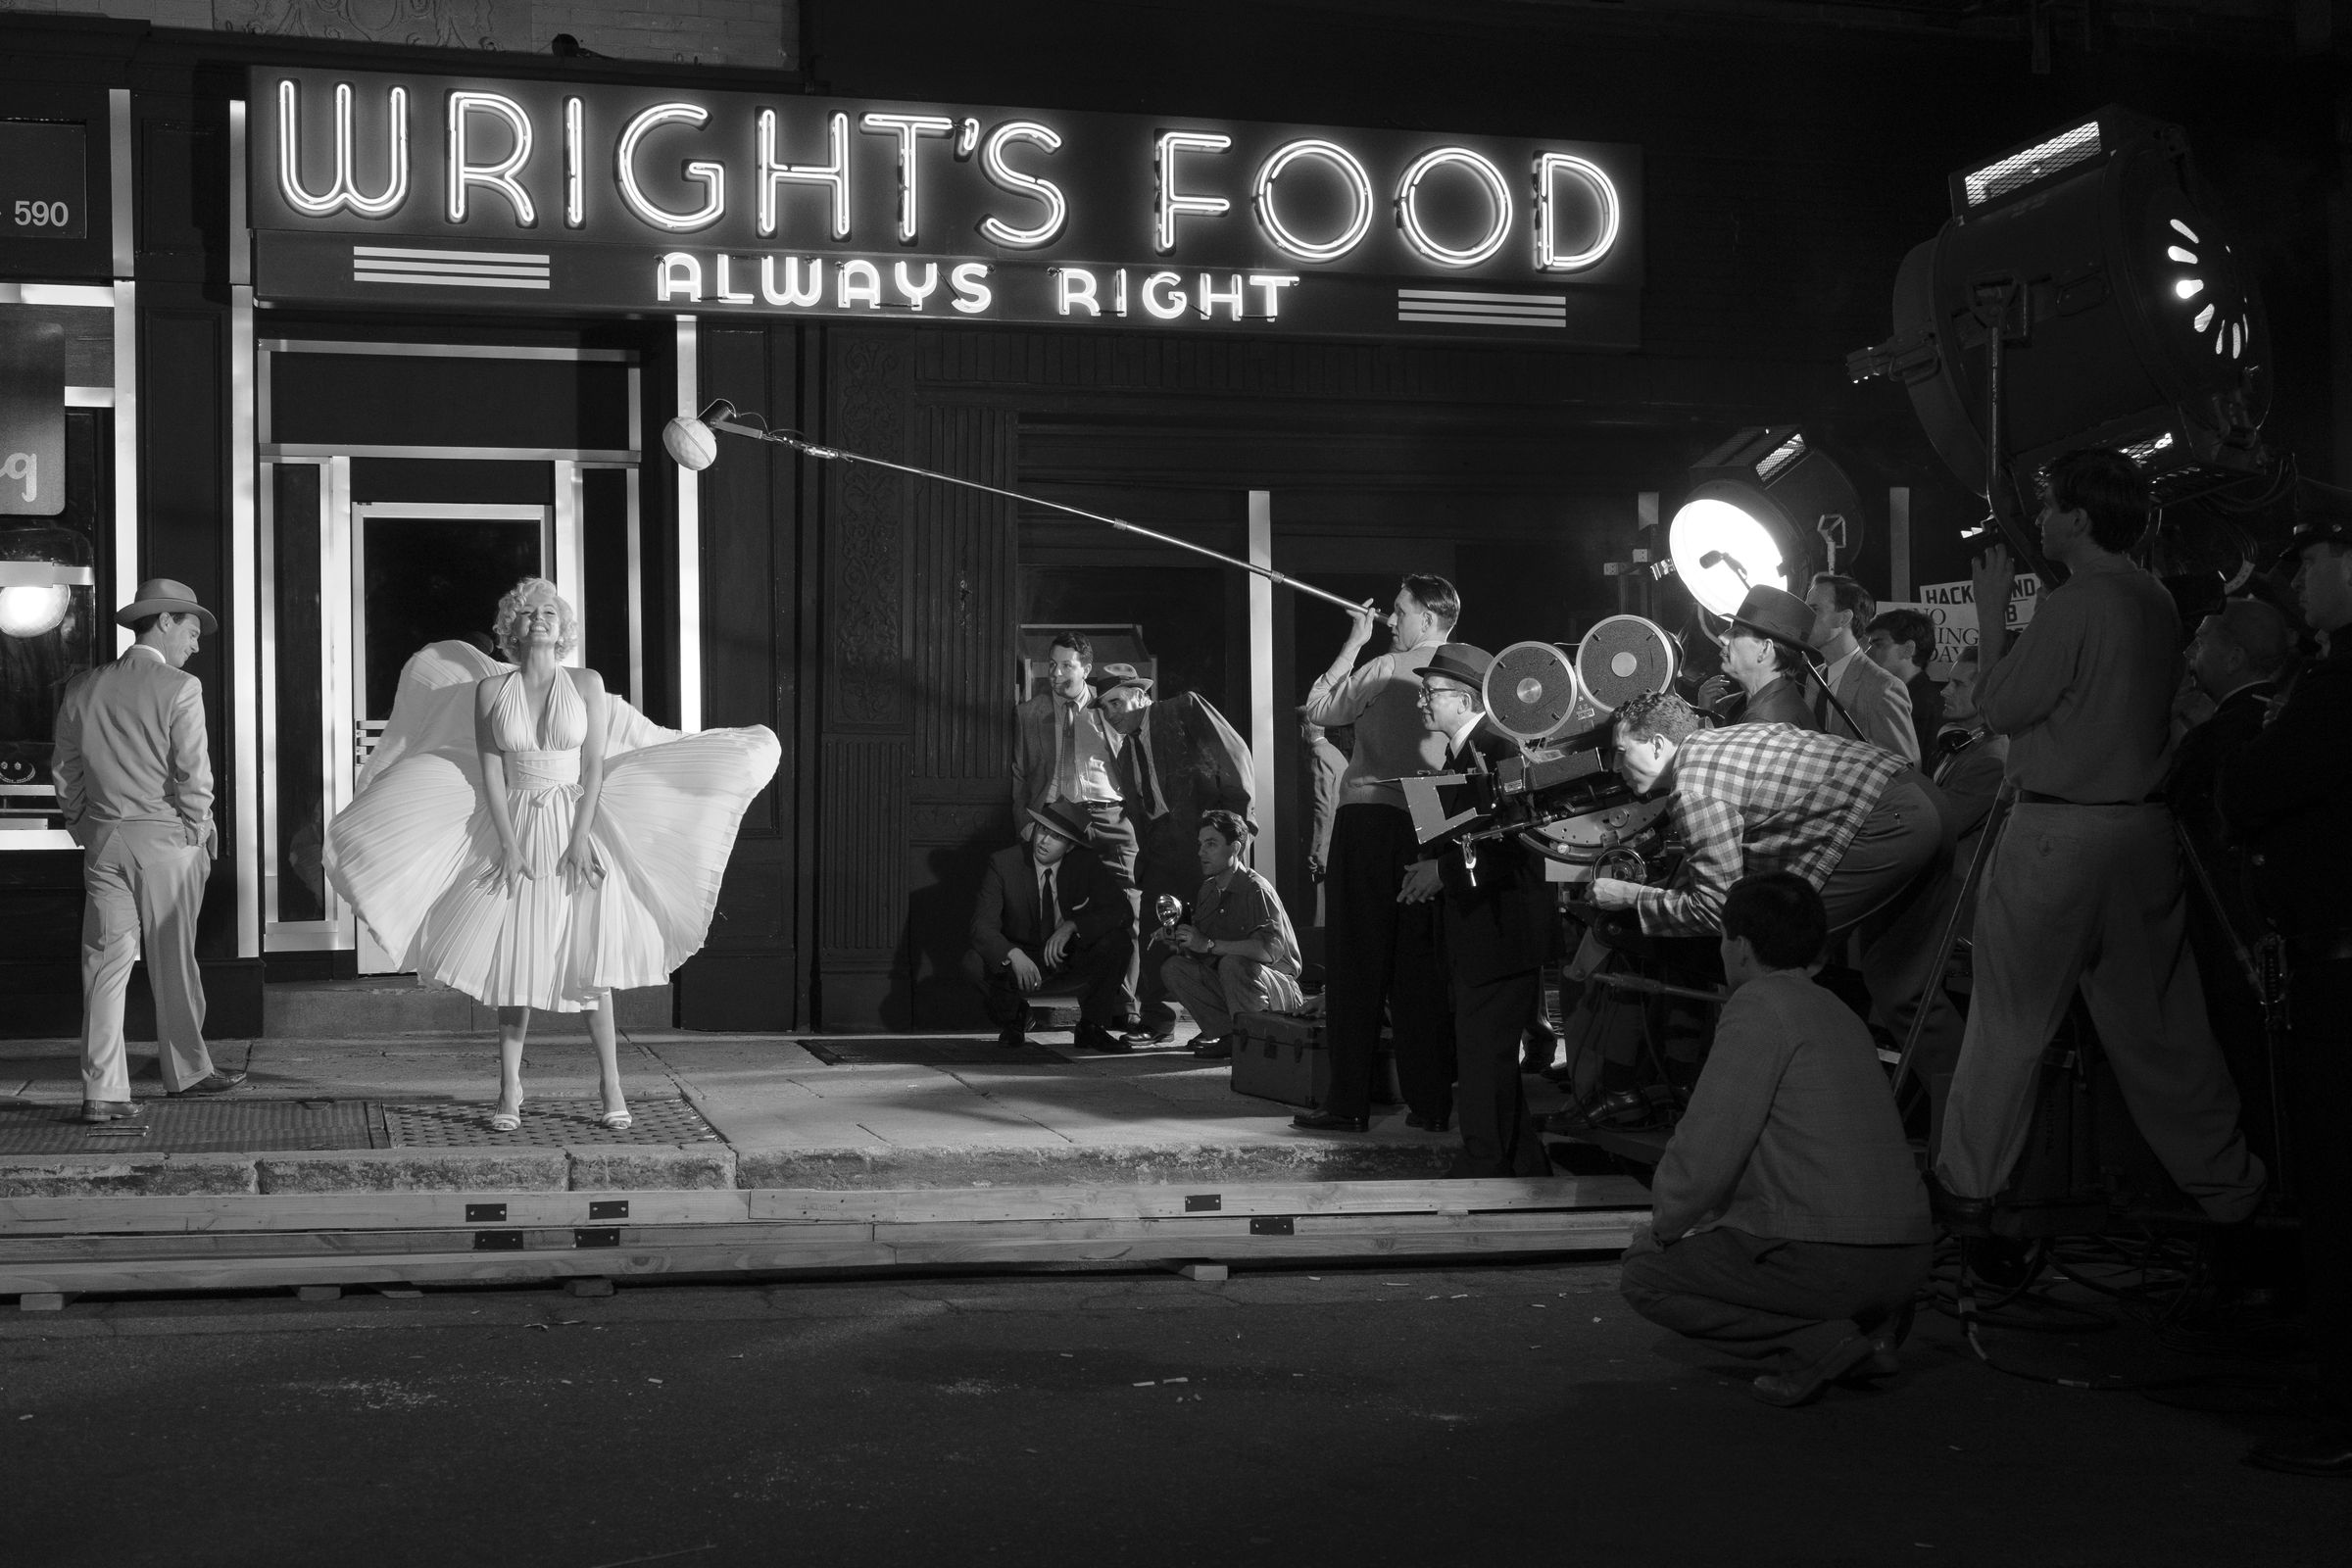 A black and white recreation of the iconic scene from The Seven Year itch in which a woman in a white cocktail dress stands on a grate on a sidewalk as a train passes by underneath, causing her dress to billow up around her. To the woman’s right is her co-star, a man in a suit looking at her, and to her left stands a the massive gaggle of men who make up the crew filming the scene.